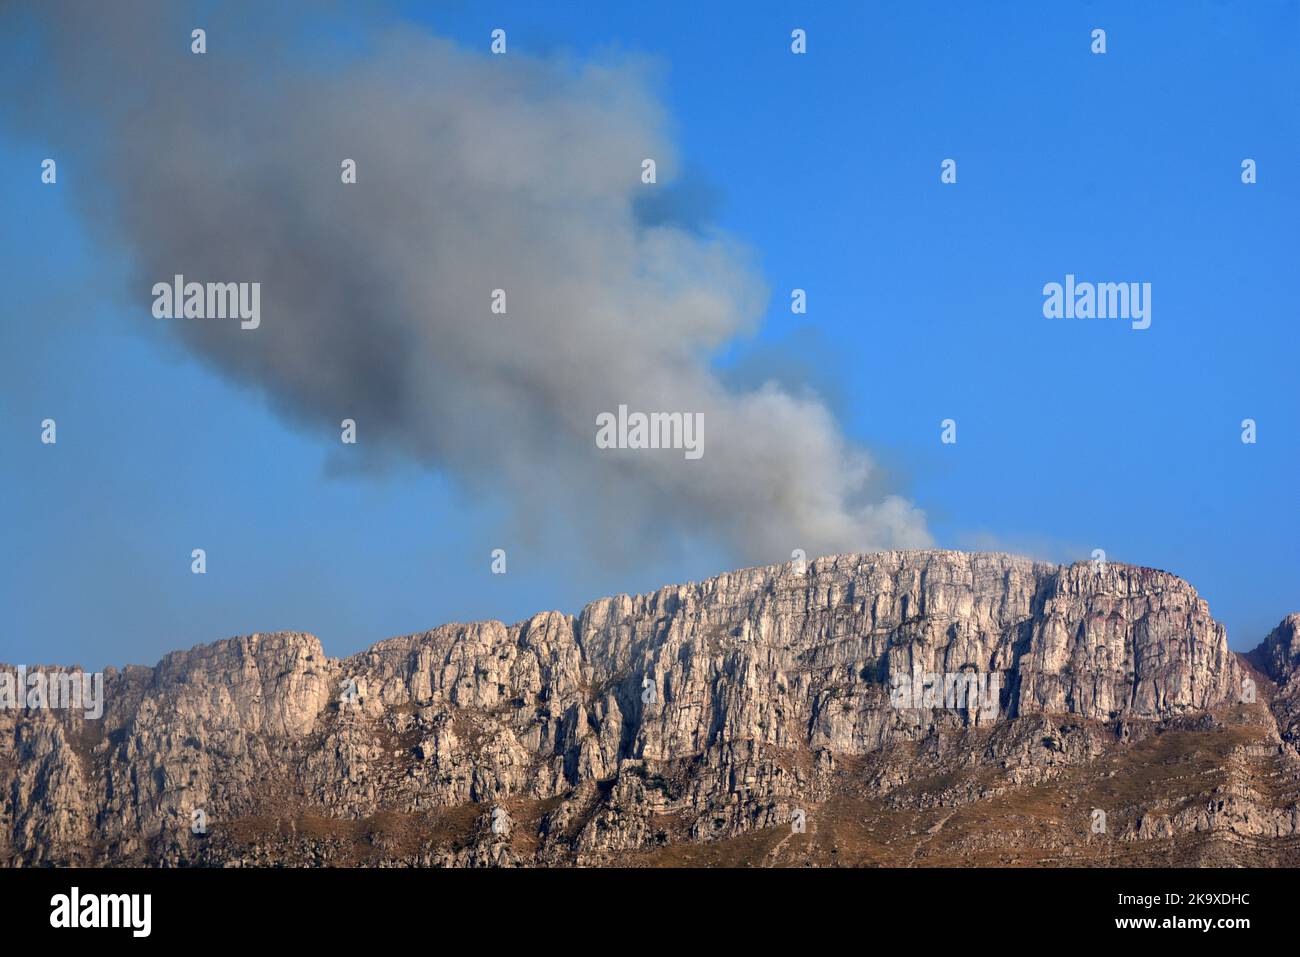 Smoke of Wild Fire, Bush Fire or Forest Fire Burning on Mountain Ridge of Les Traversières in the Verdon Lower Alps Alpes-de-Haute-Provence France Stock Photo